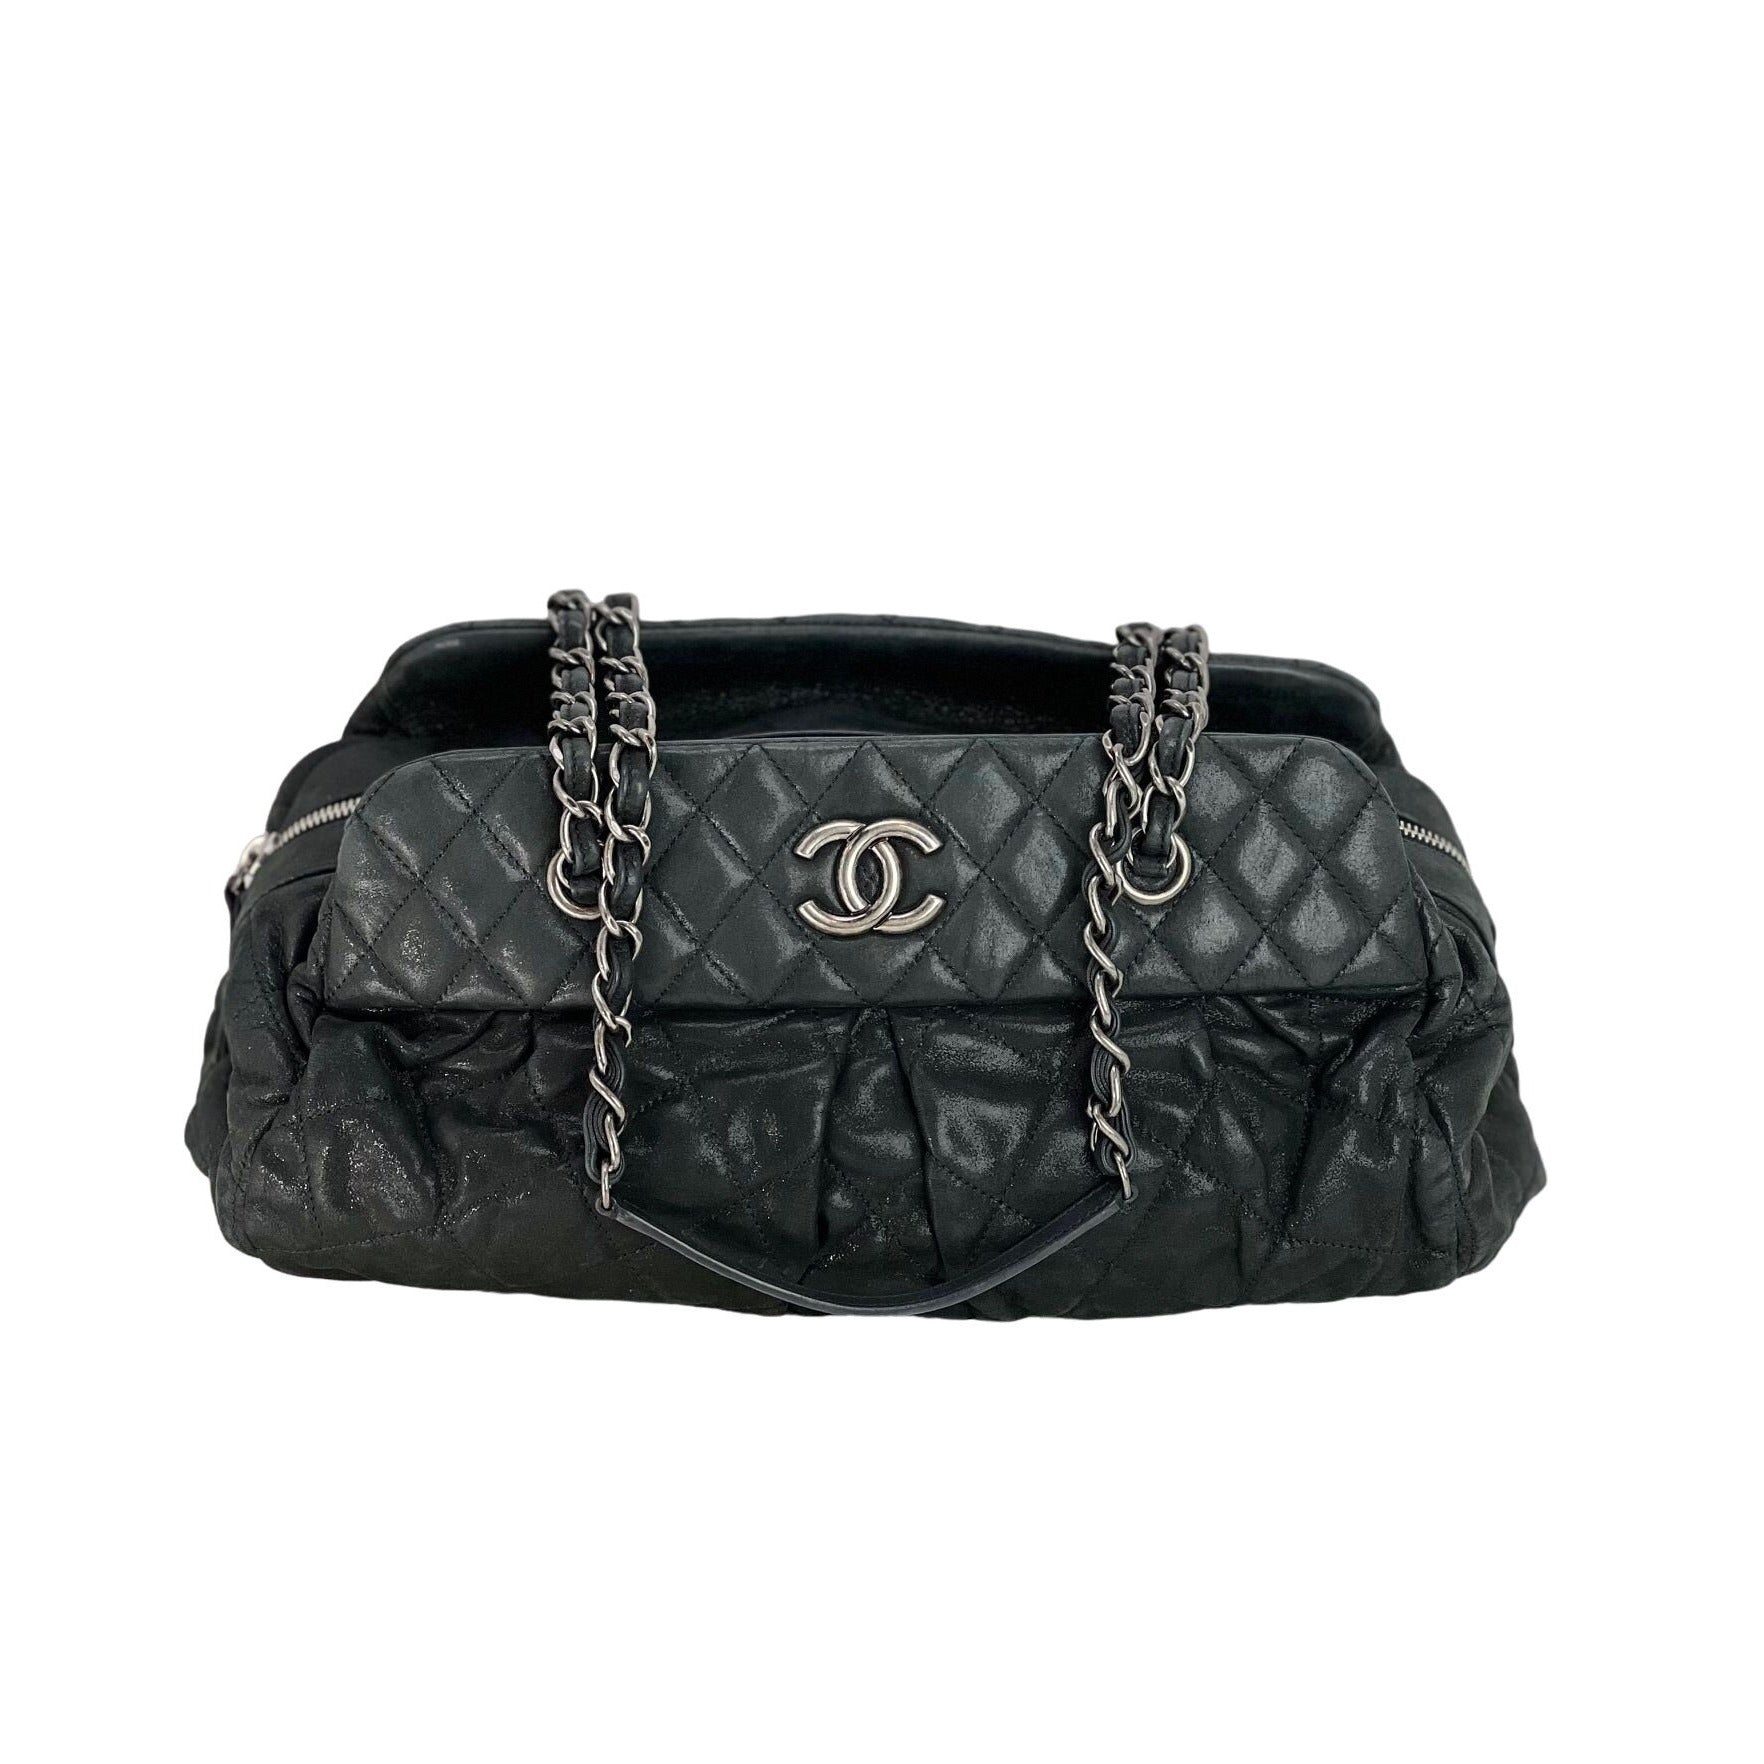 CHANEL Chanel Iridescent Calfskin Quilted CC Tote Black